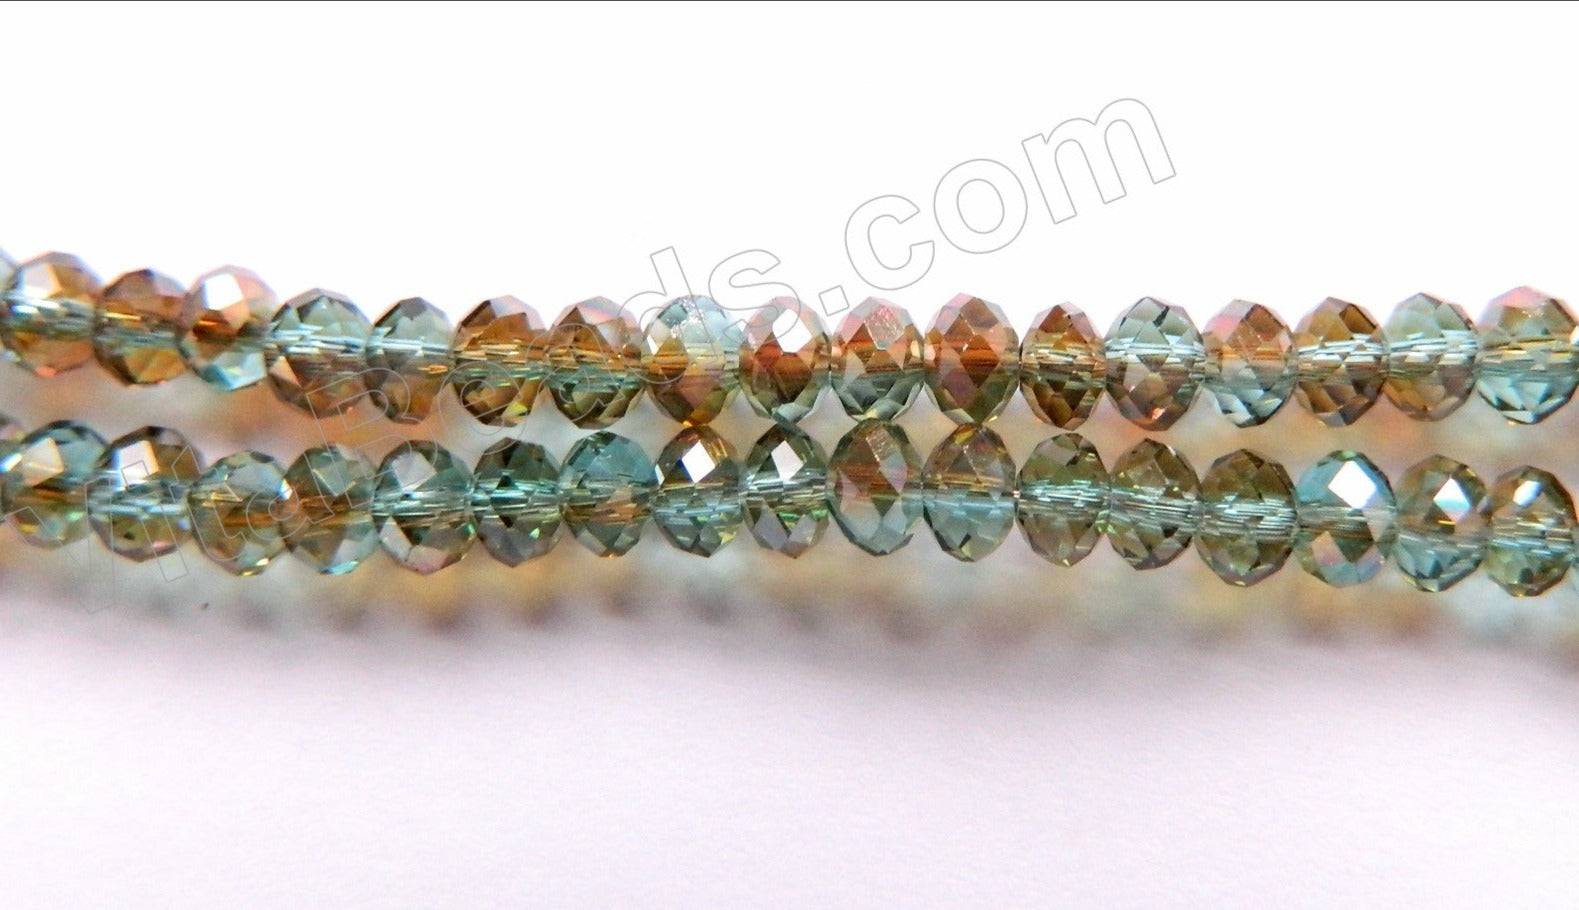 AB Coated Dark Green Brown Qtz  -  Small Faceted Rondel  18"     4 x 3 mm